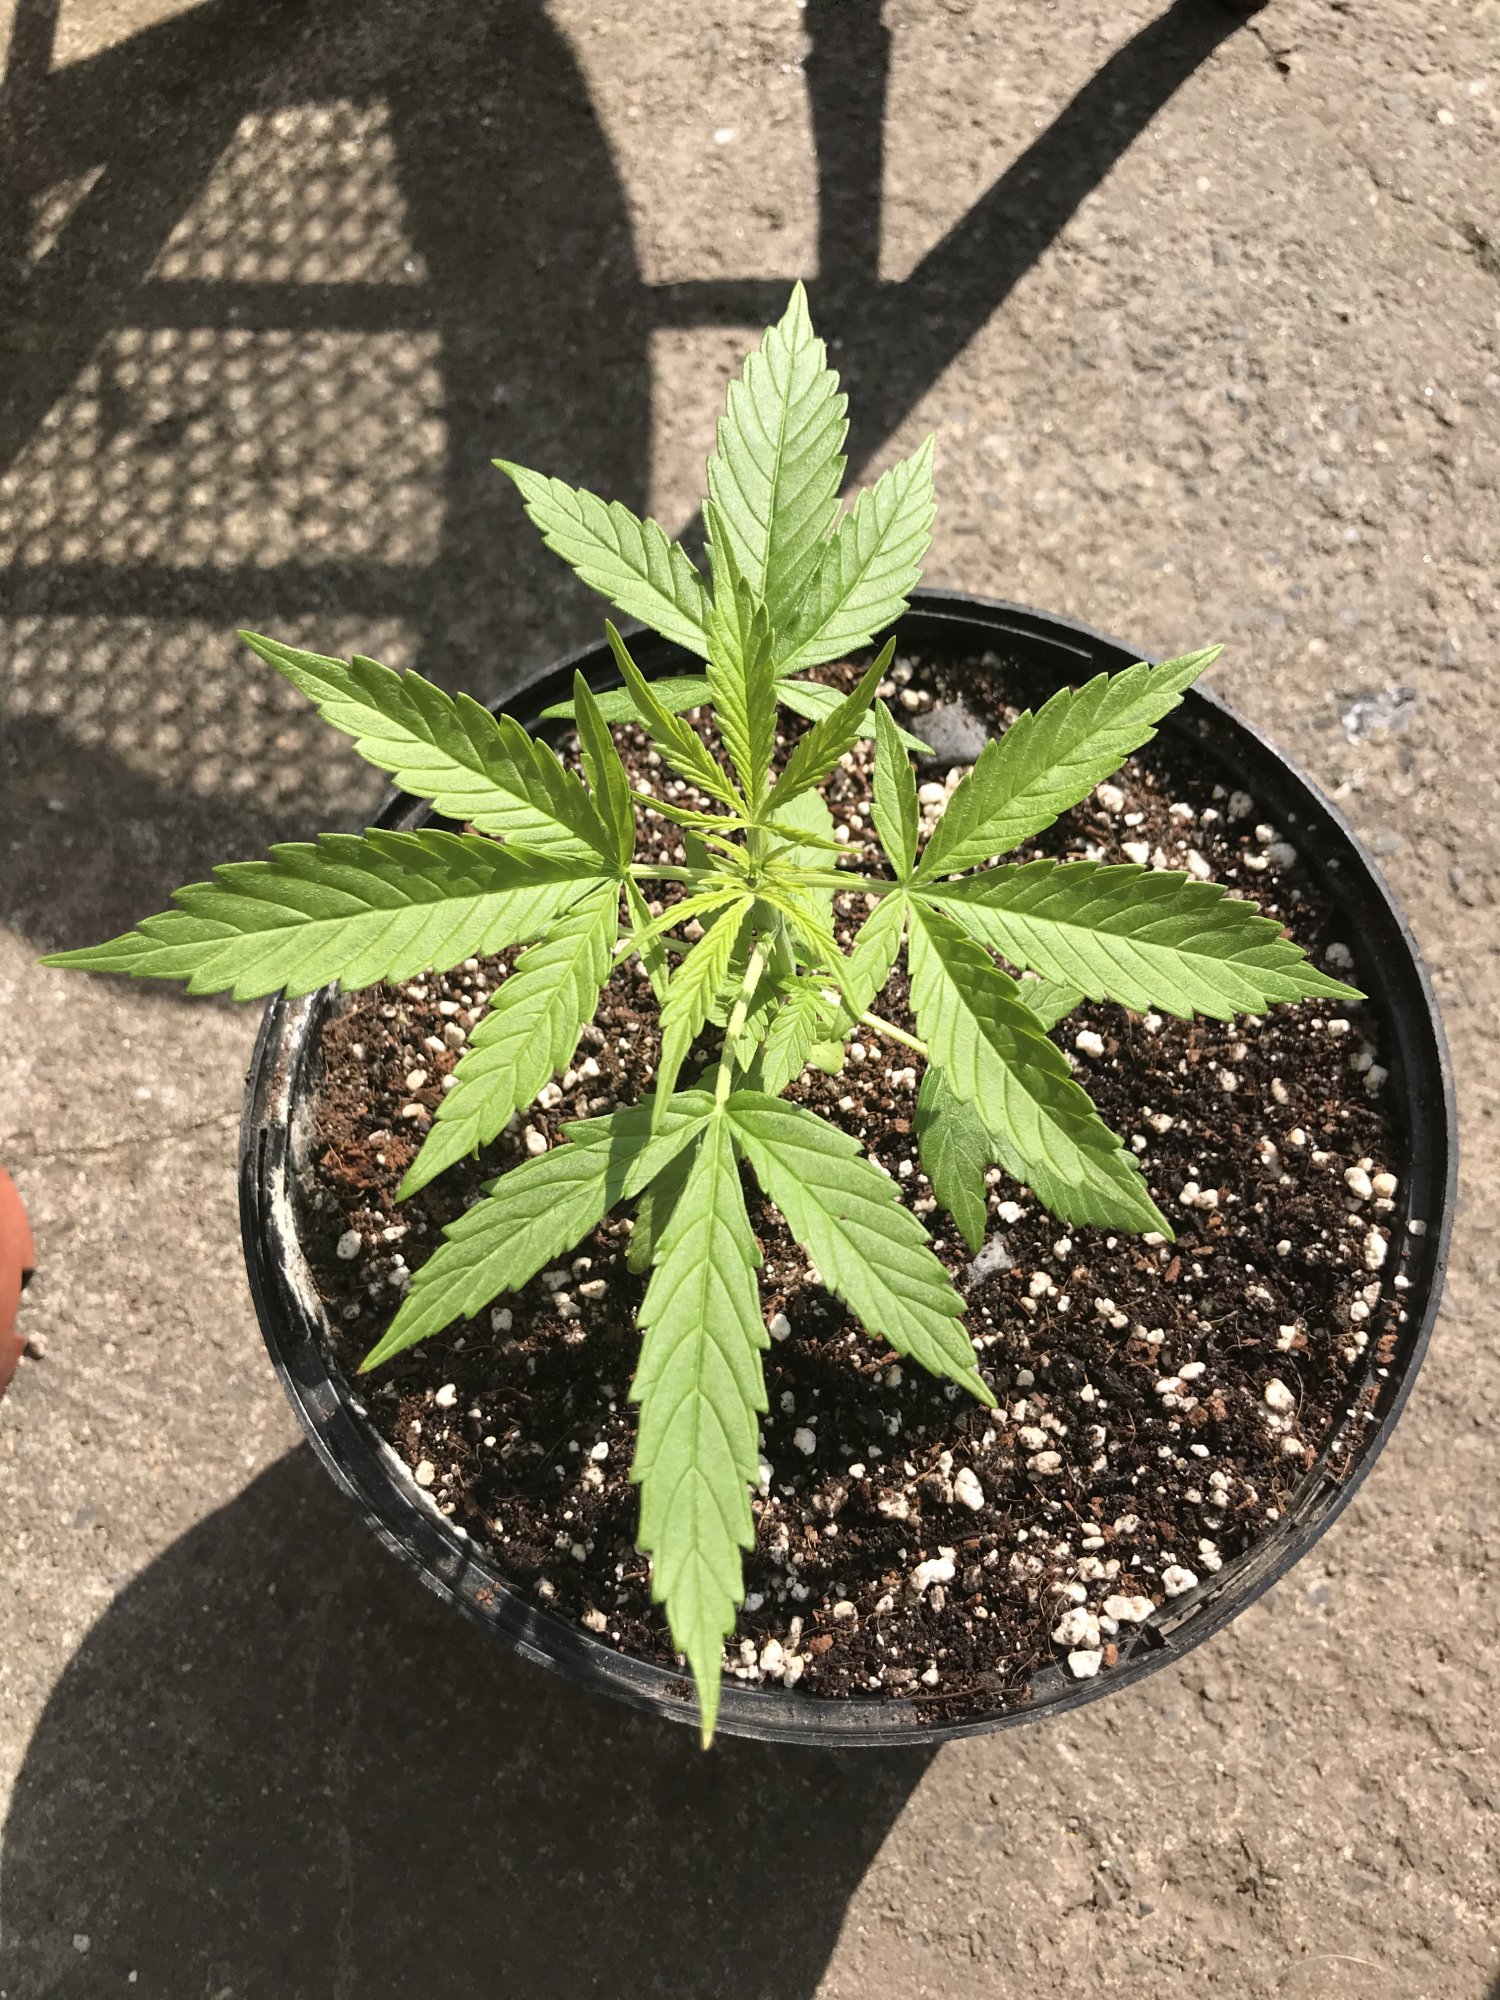 New grower  my second grow two different plants cant tell which is which